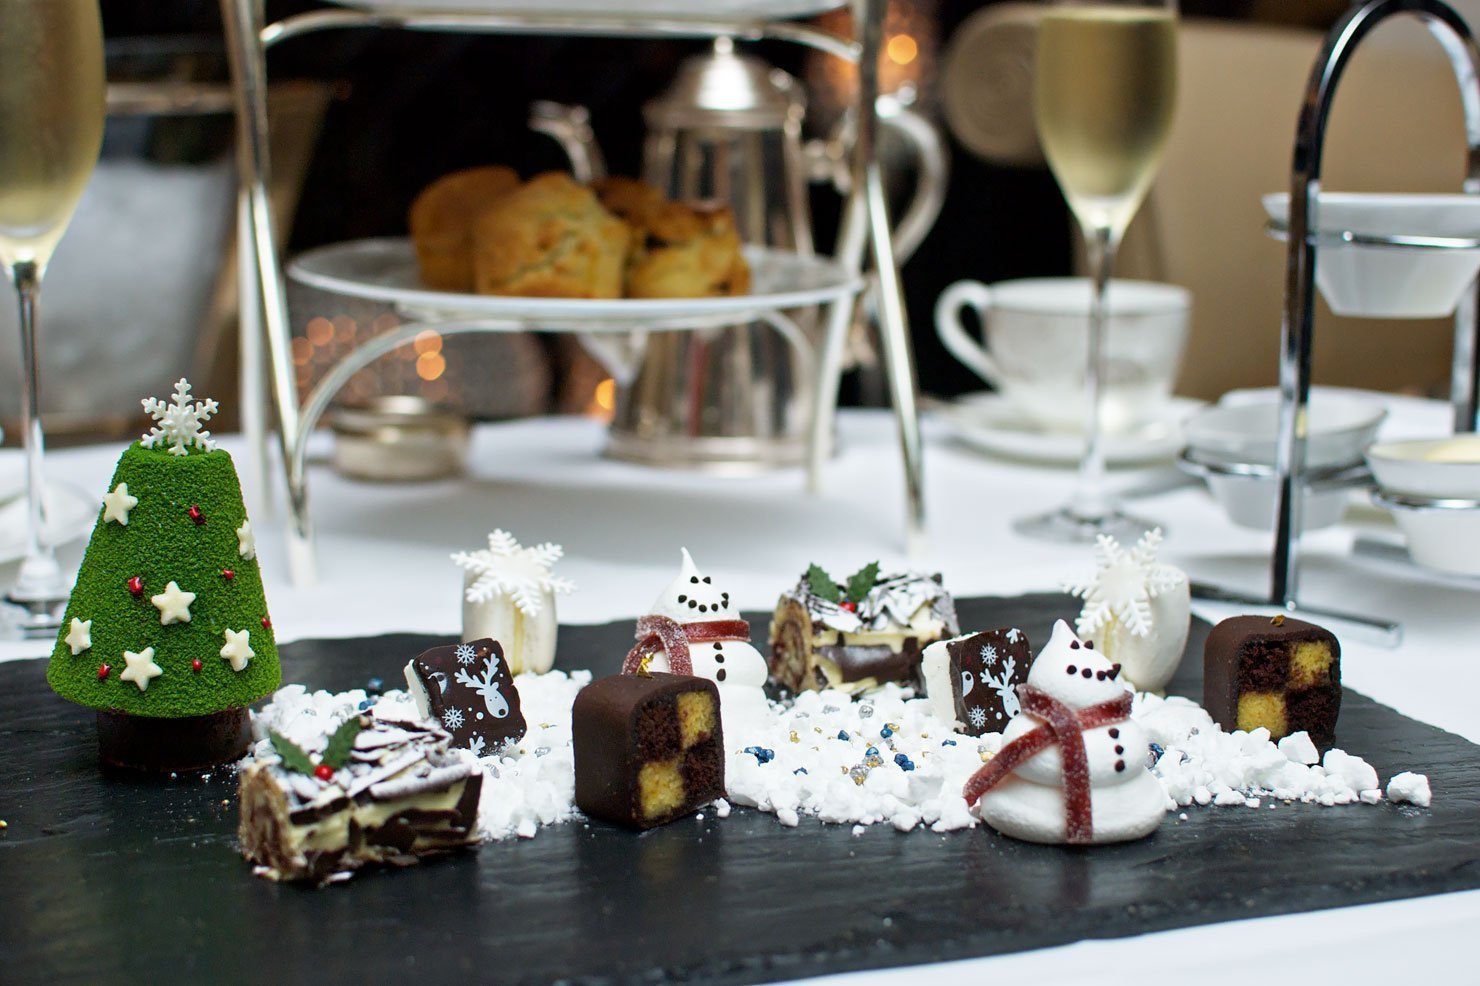 A Christmas Winter Wonderland - Cakes and Pastries as part of the Christmas Snow Scene Afternoon Tea at the Conrad London St James hotel